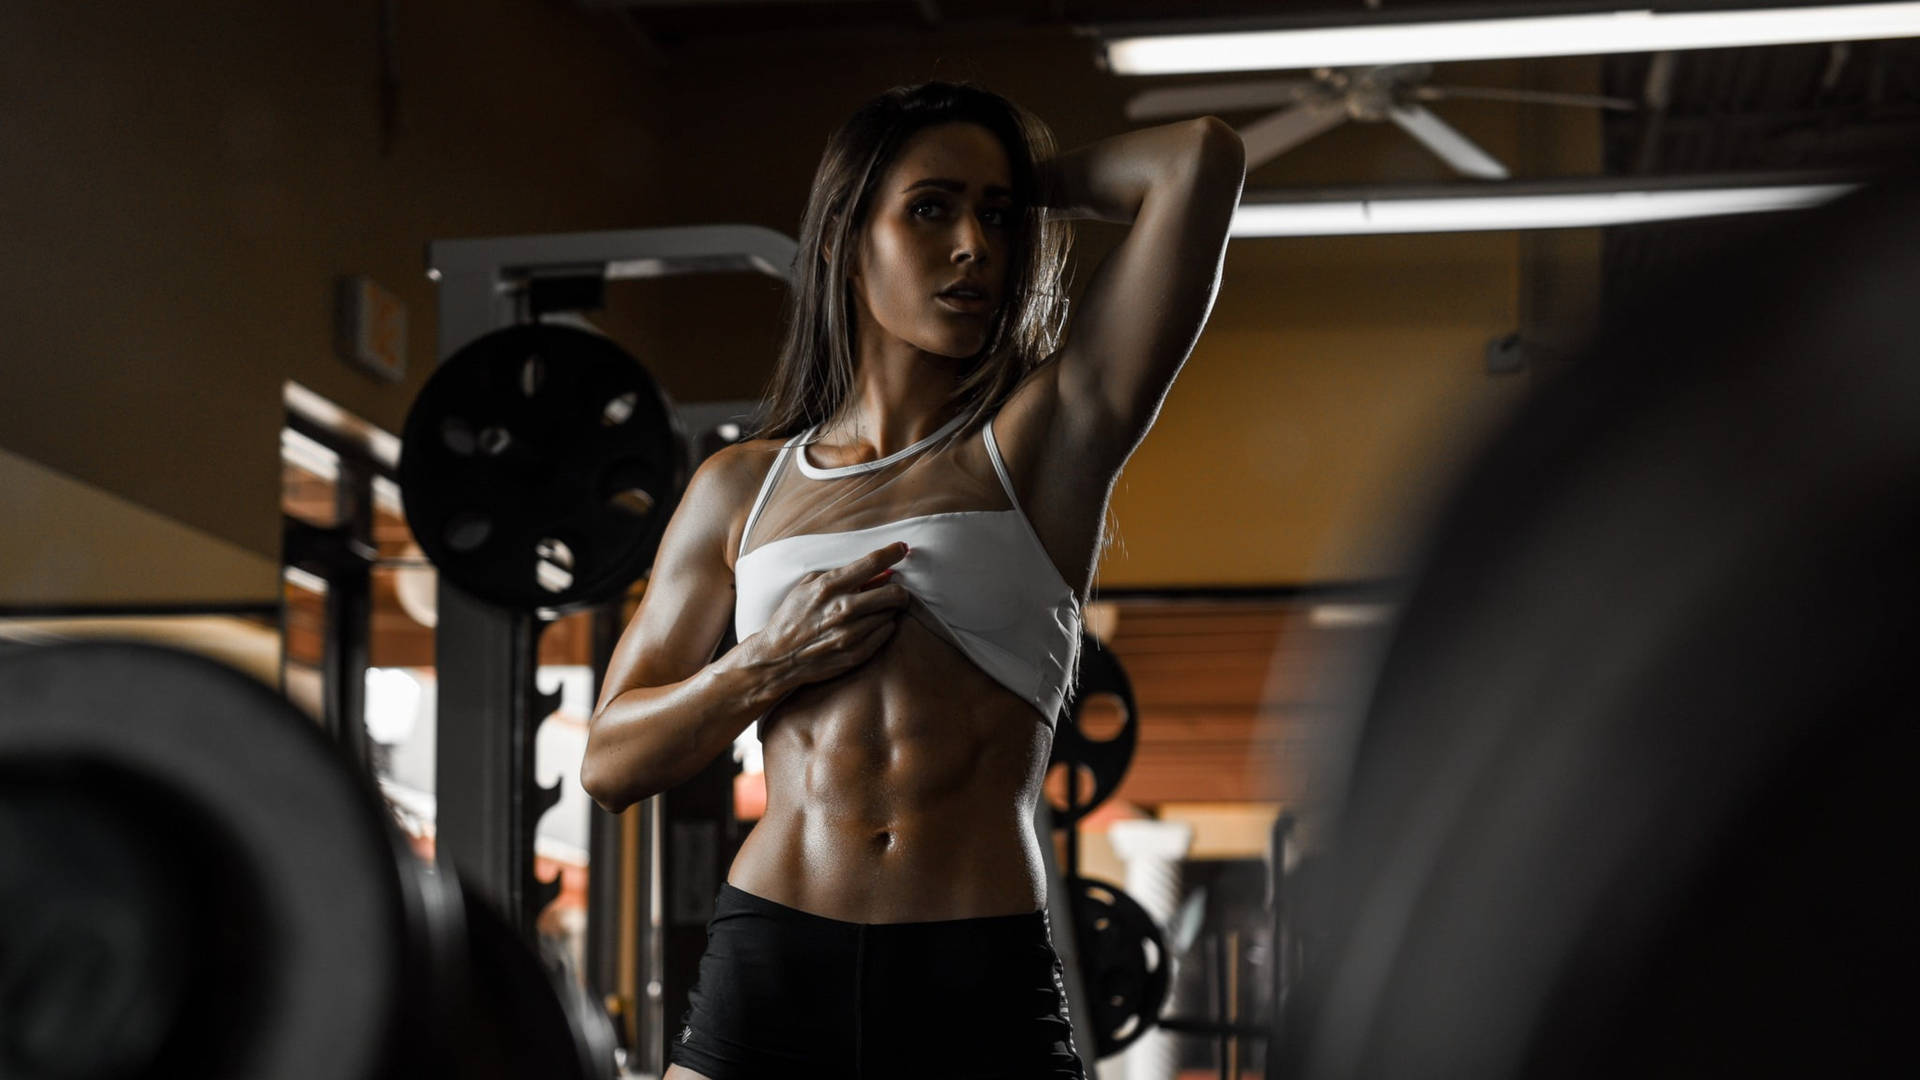 Woman Showing Gym Abs Wallpaper